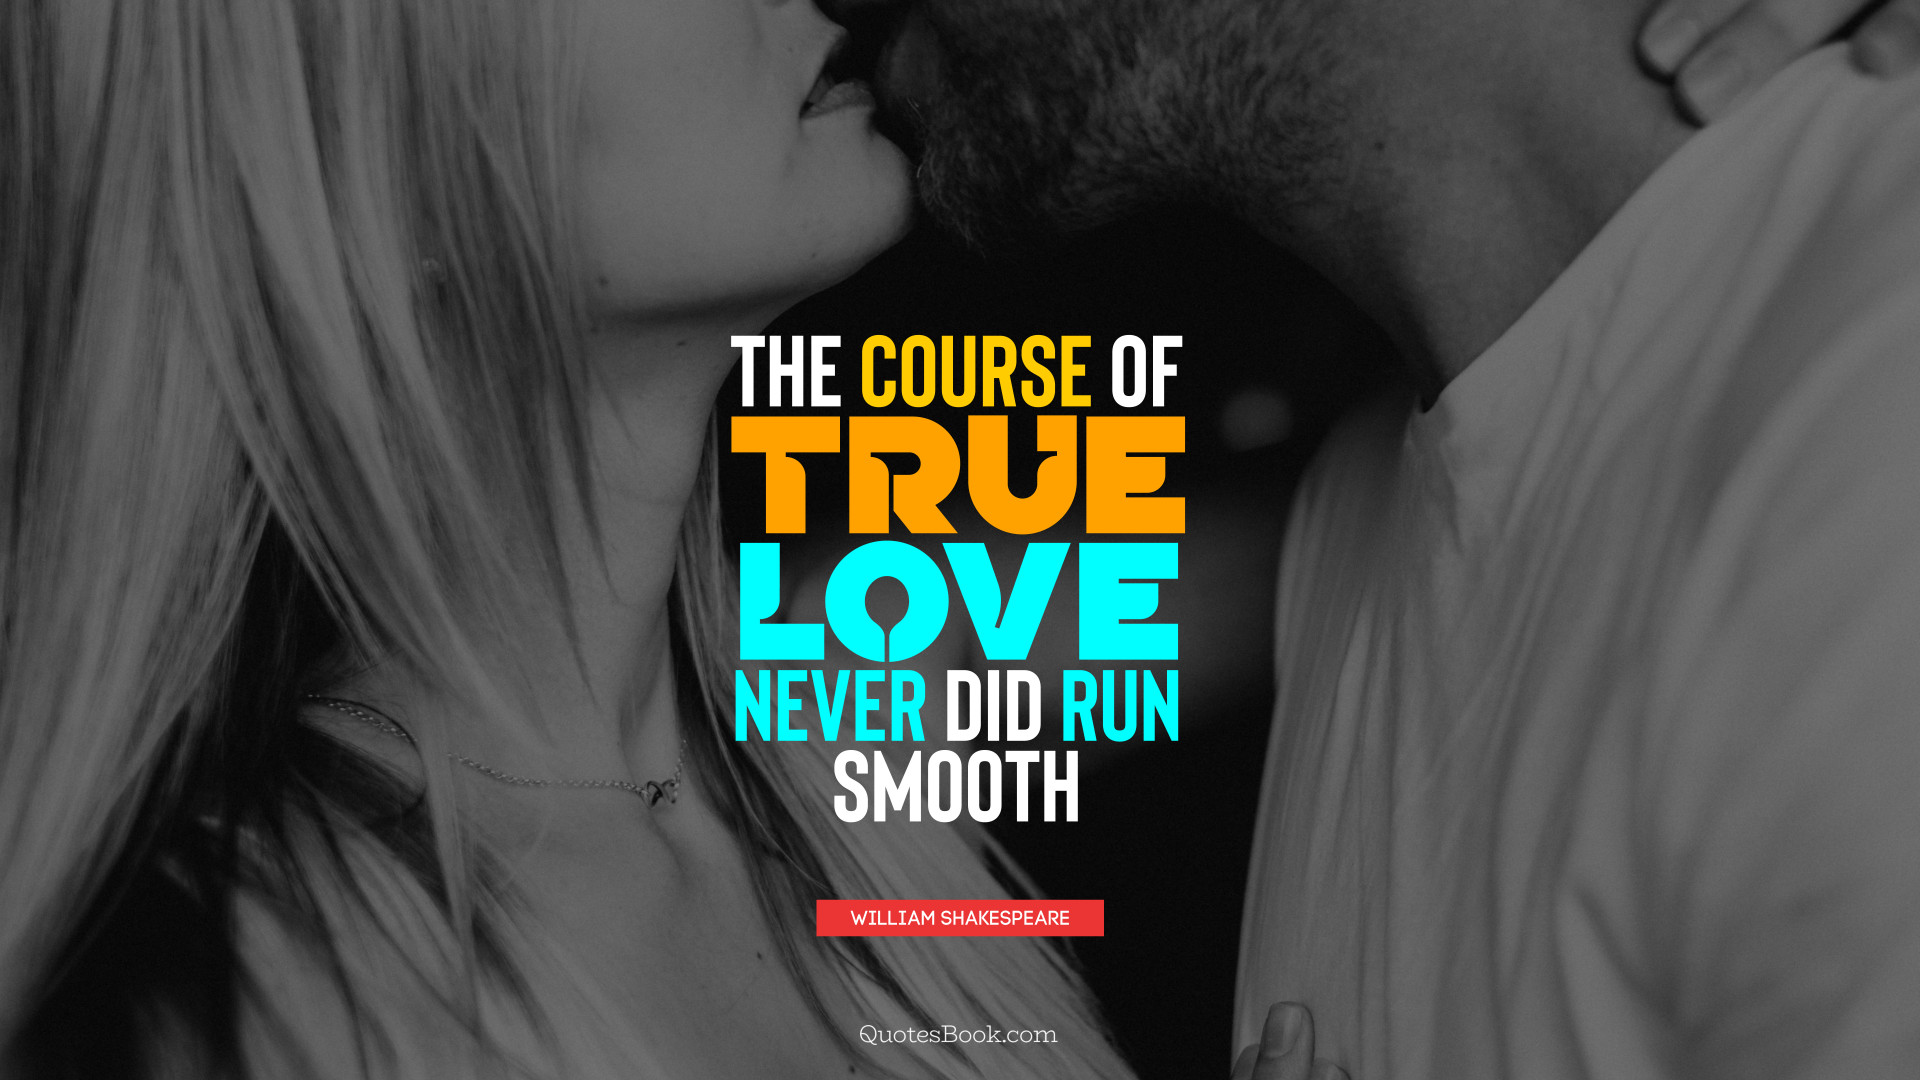 The course of true love never did run smooth. Quote by William Shakespeare QuotesBook